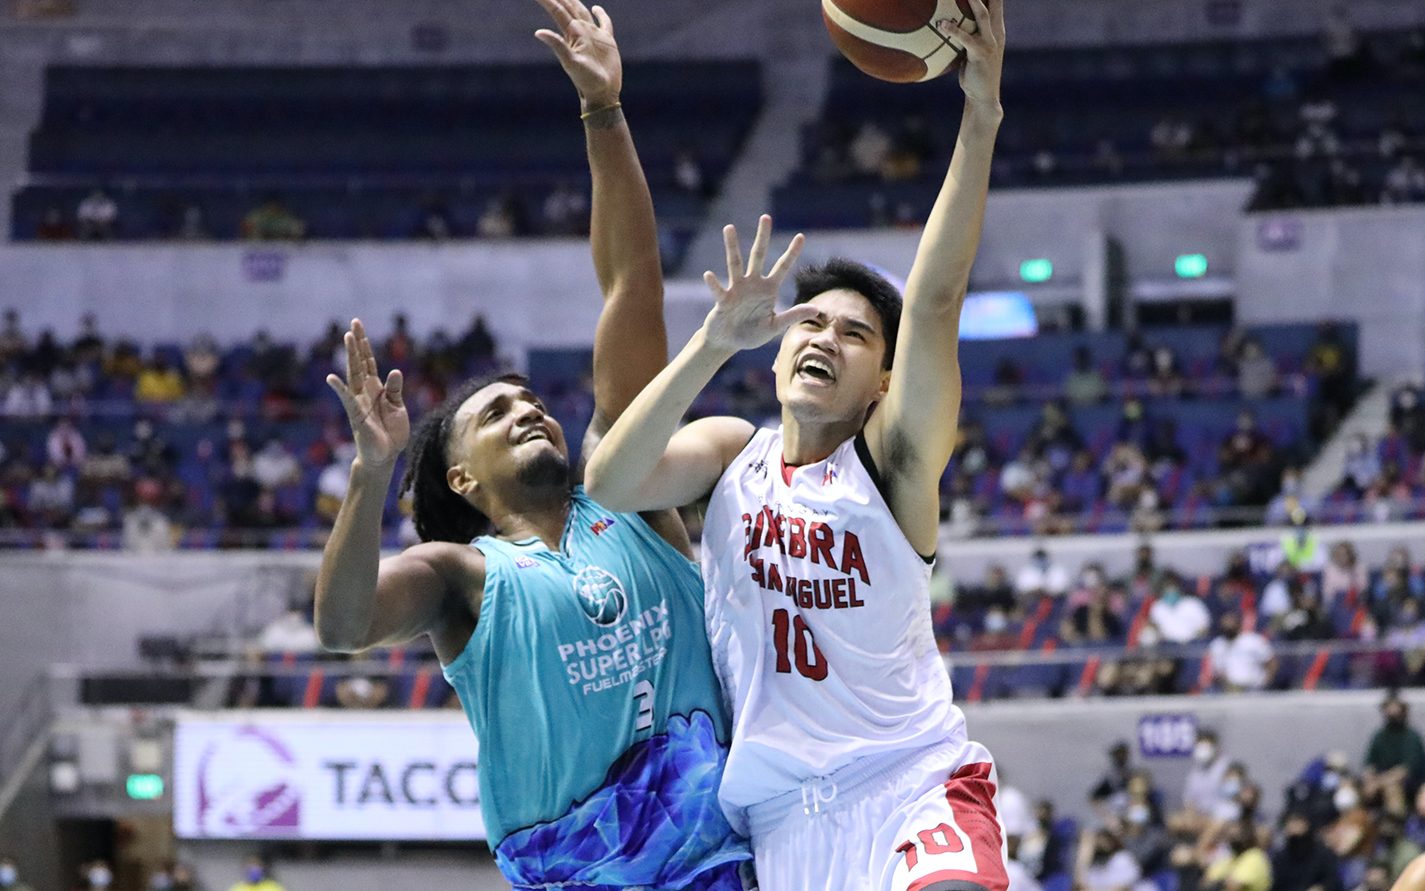 Stepping up for injury-plagued Ginebra, Arvin Tolentino named PBA Player of the Week